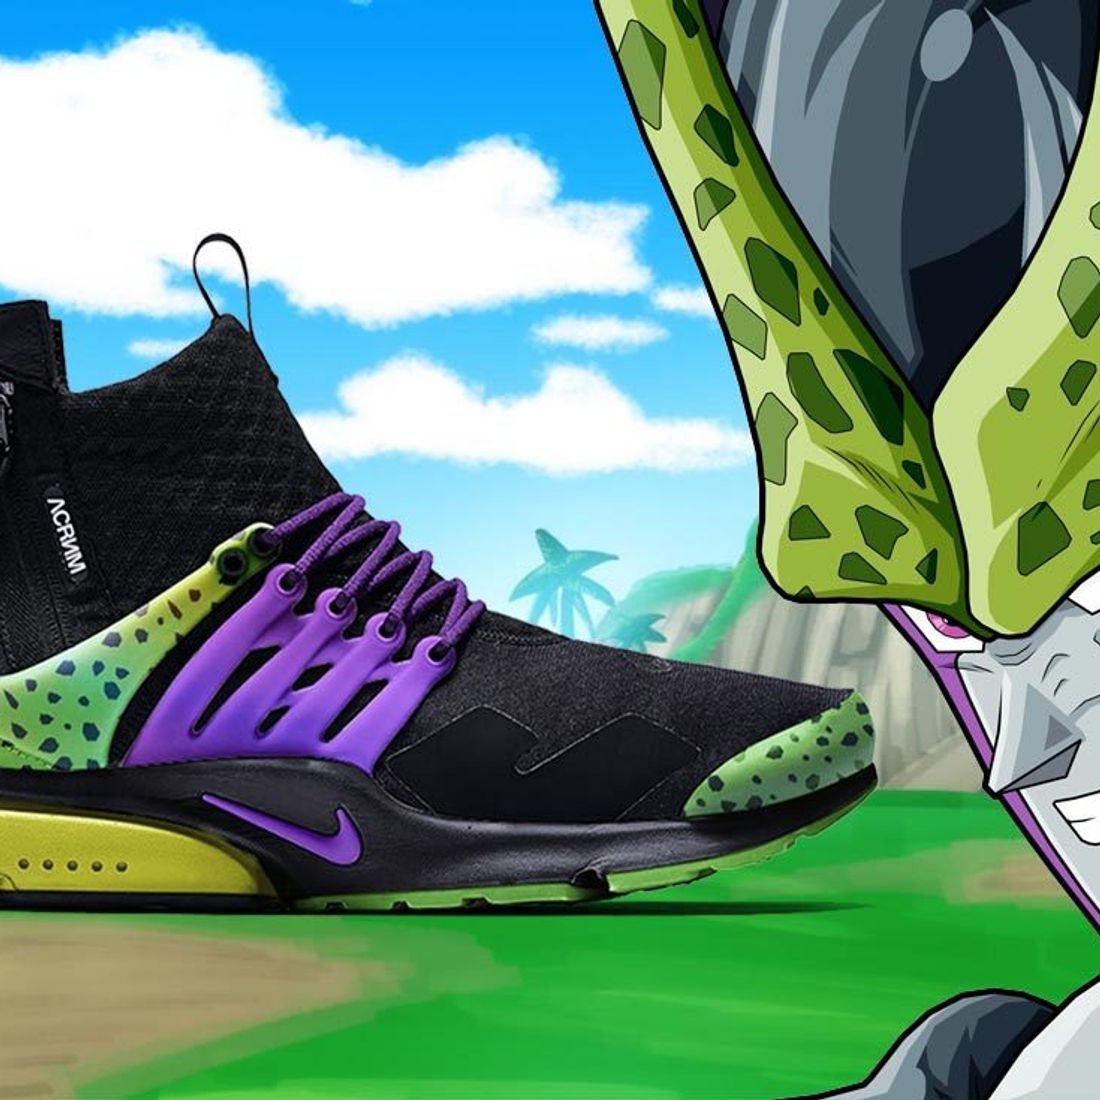 chorus Discriminate Affirm Check Out These Stunning Dragon Ball Z x Nike Concepts - Sneaker Freaker